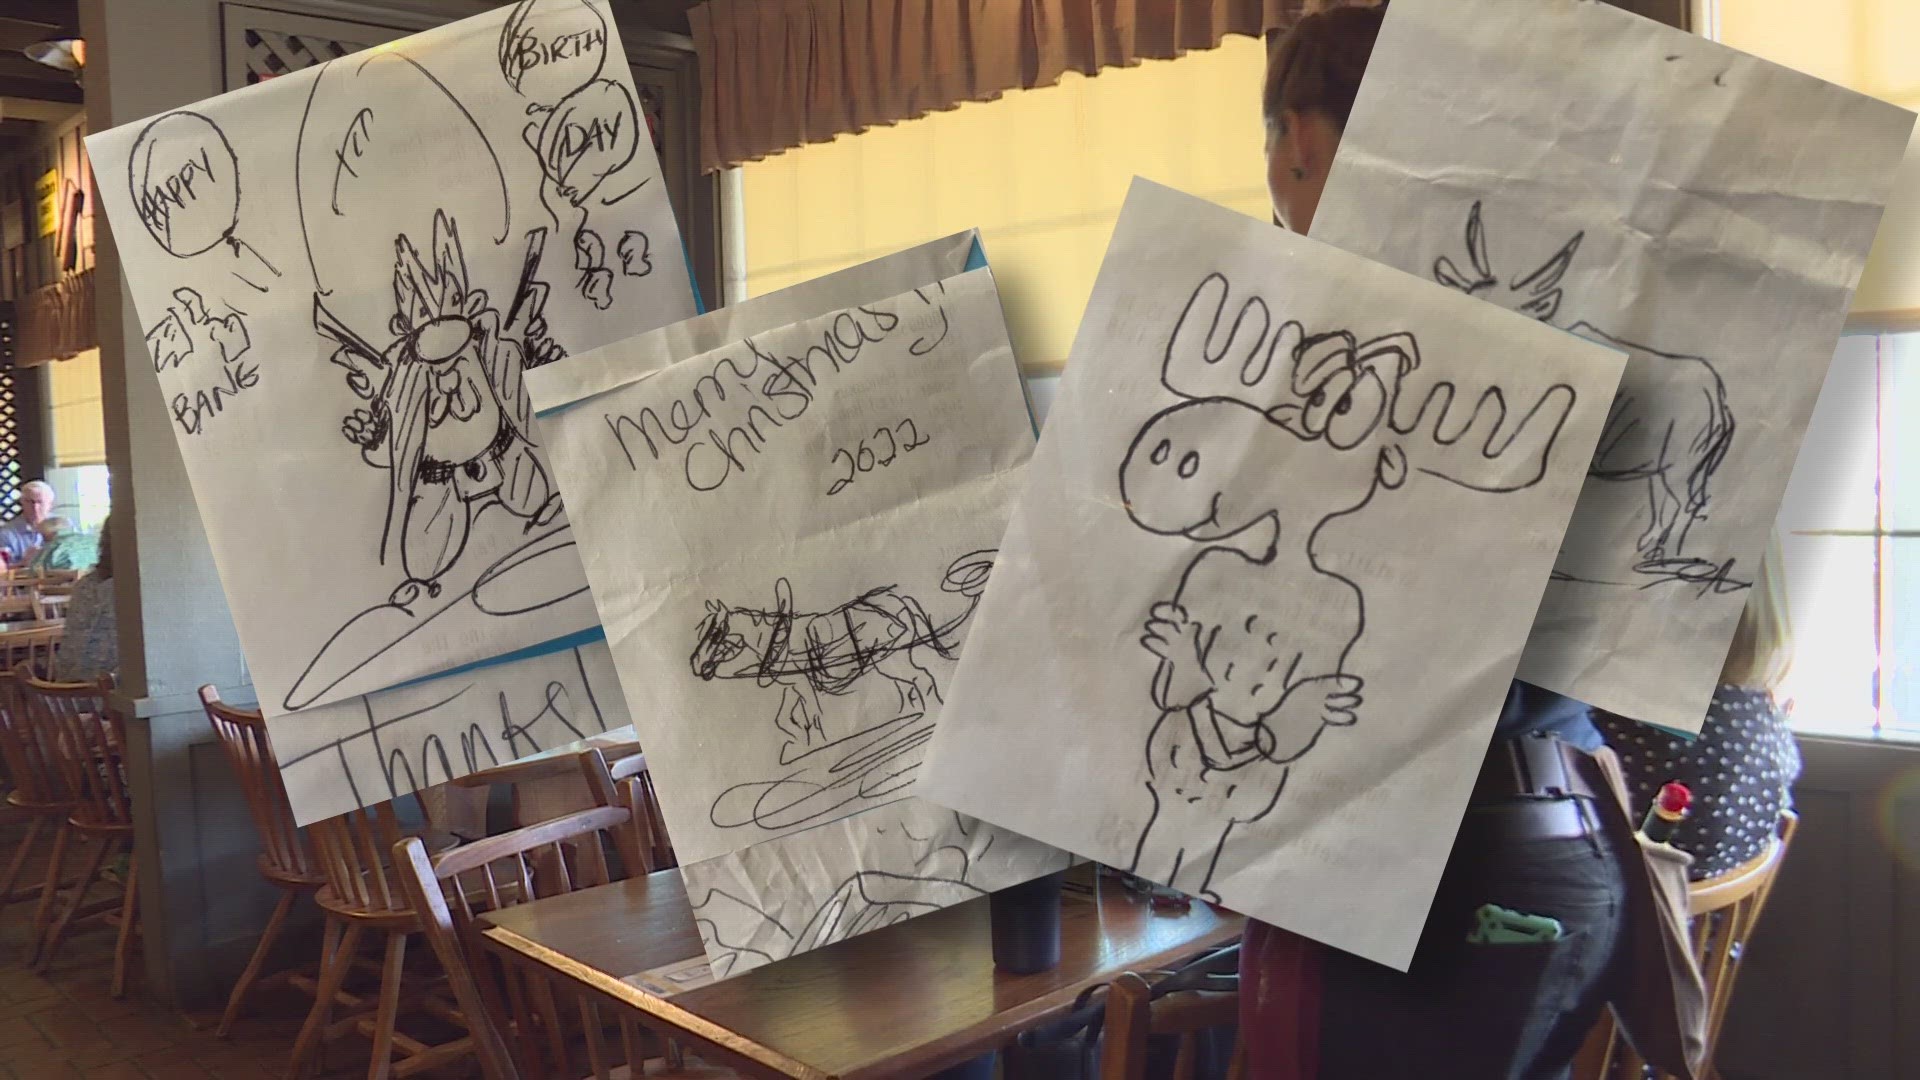 This Cracker Barrel server has a special way to connect with her customers. See how drawing puts a smile on their faces.